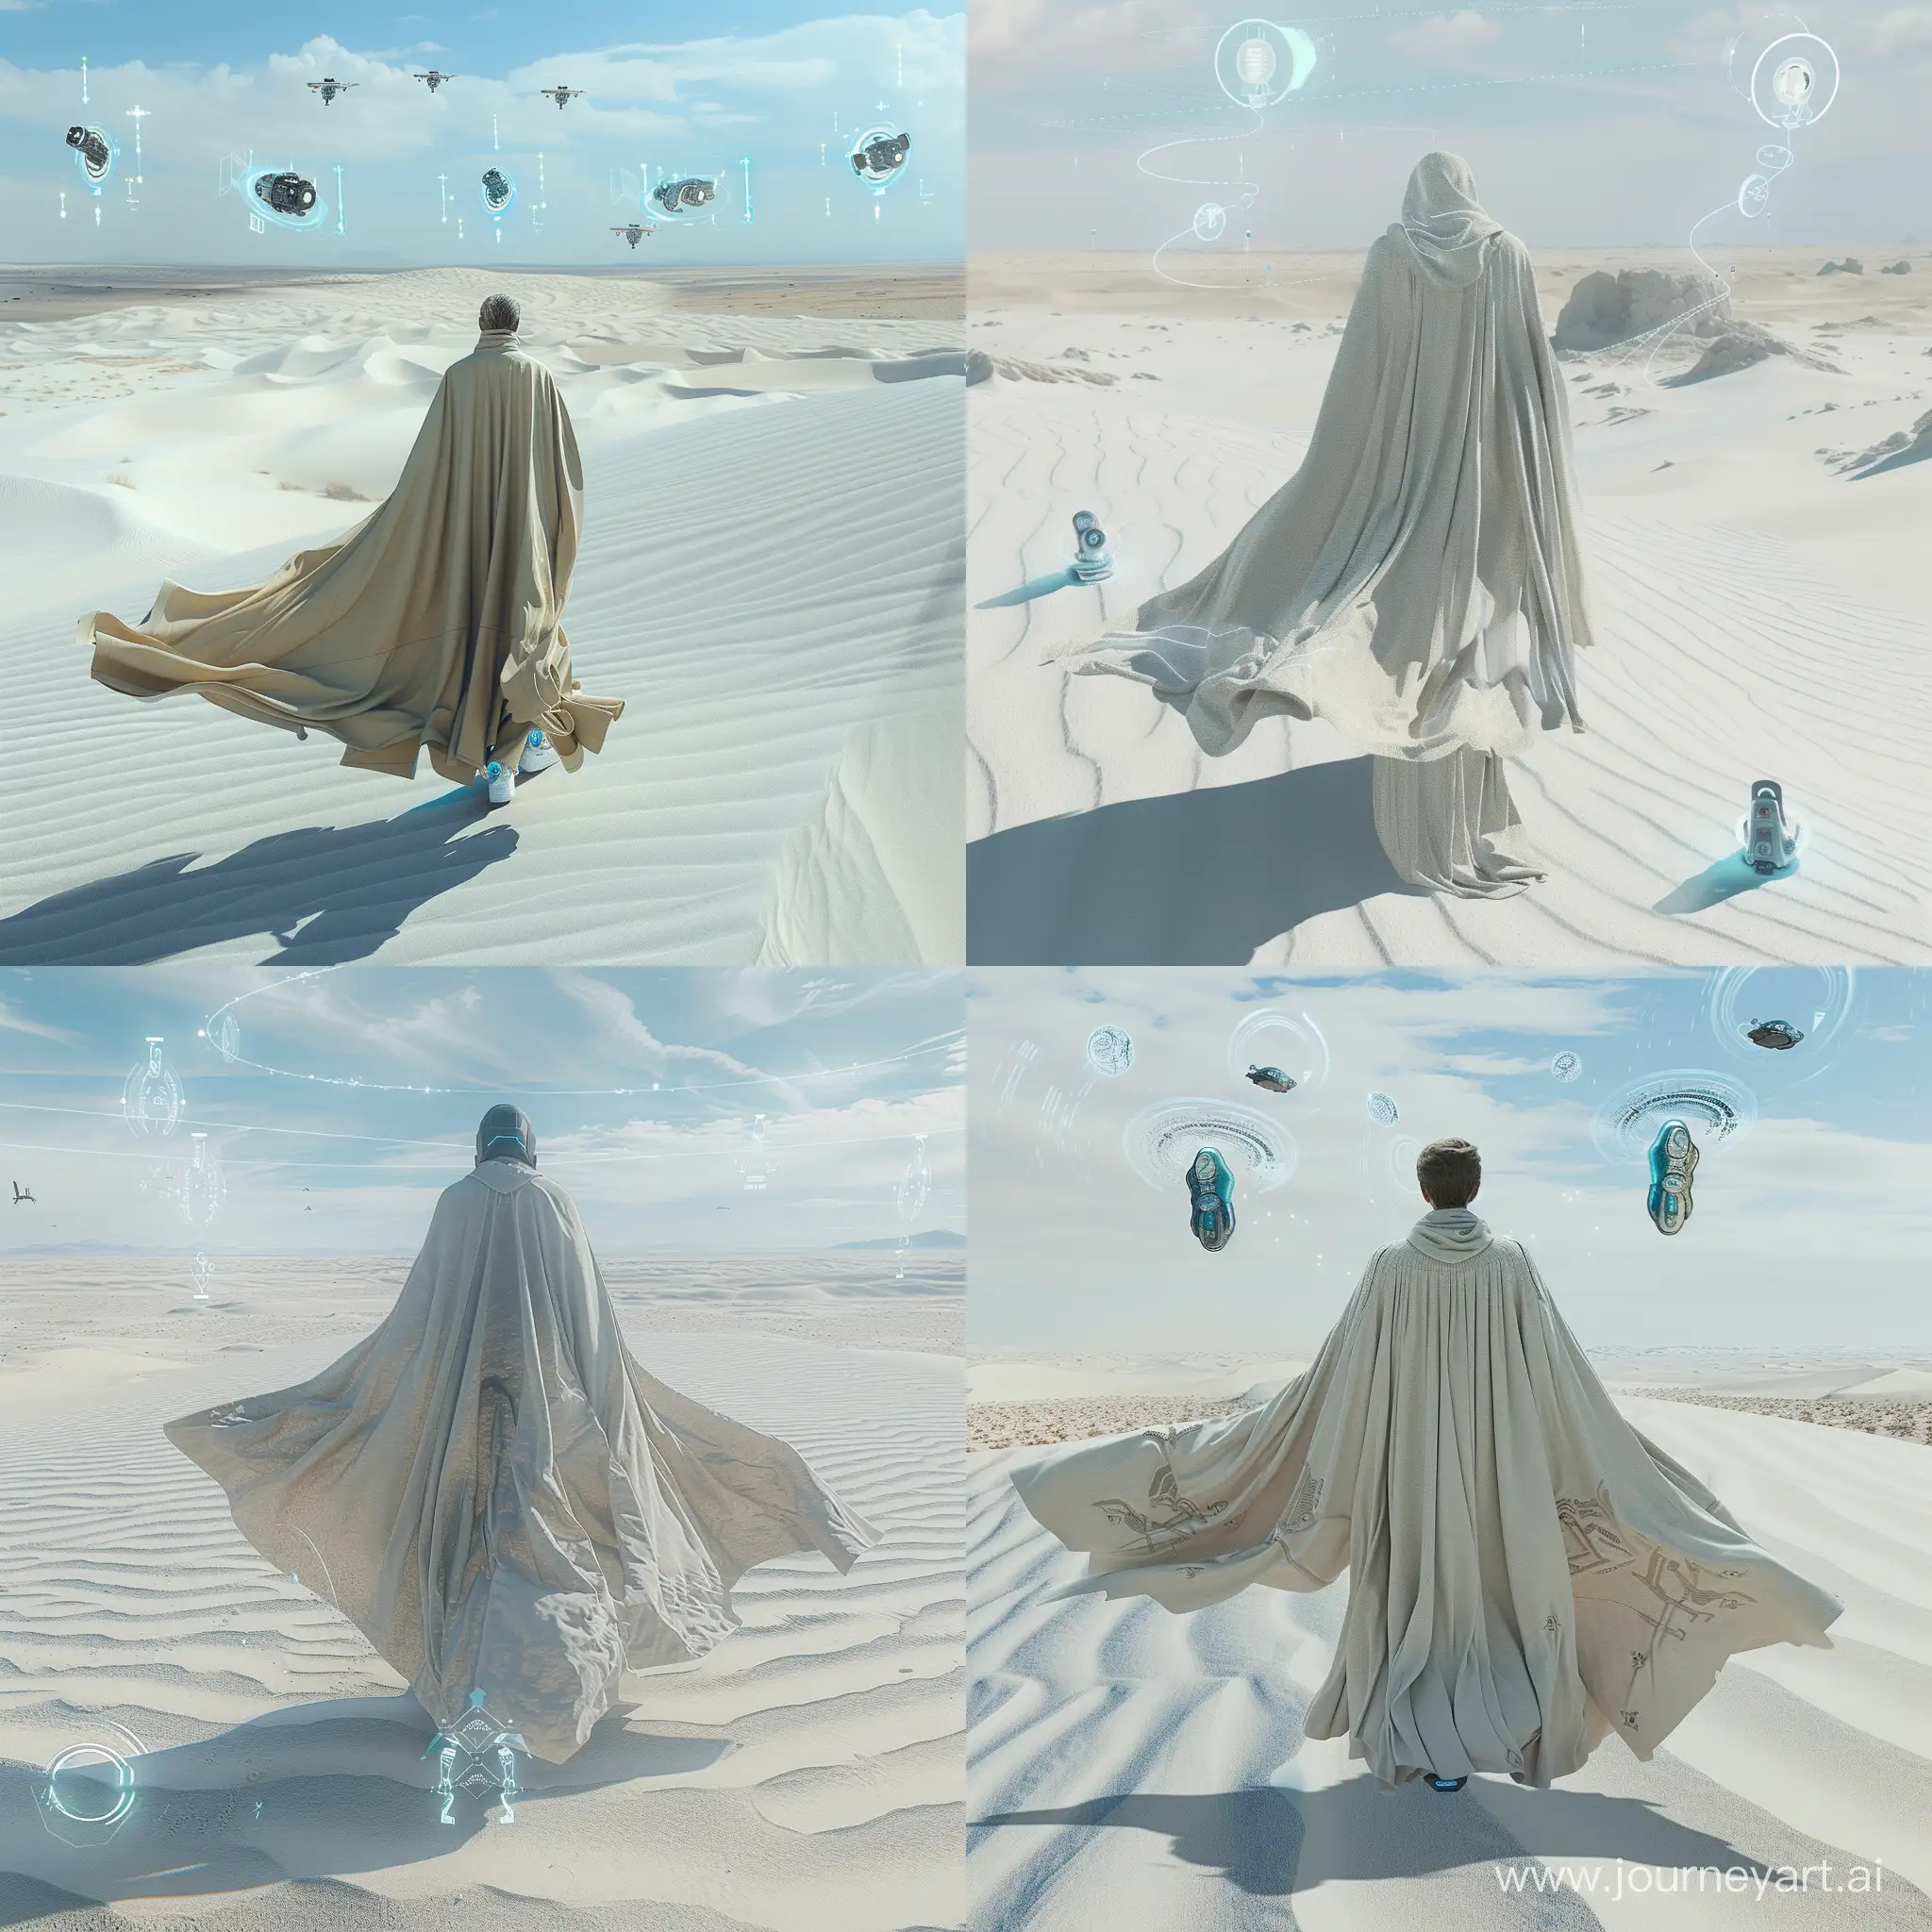 Futuristic-Explorer-in-Robes-Surrounded-by-Advanced-Technology-in-Endless-White-Desert